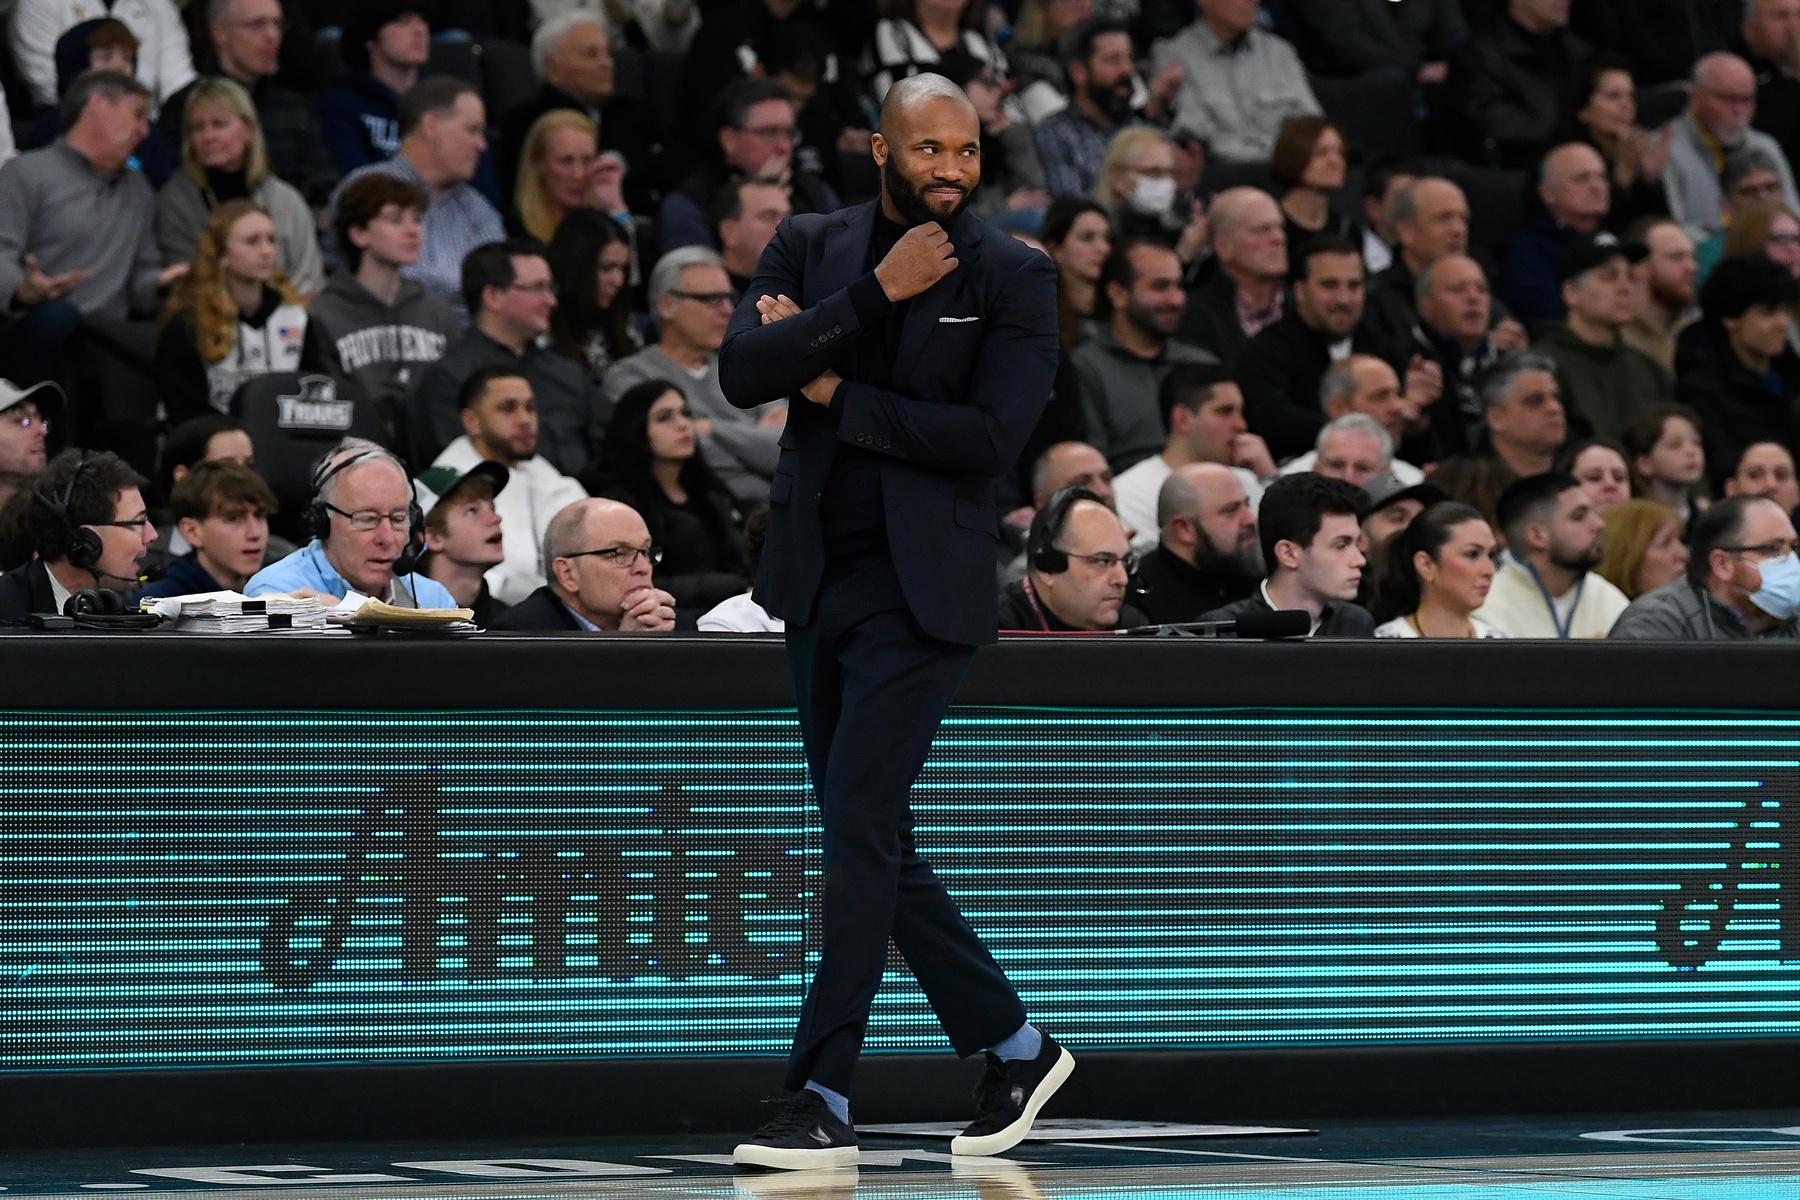 Feb 18, 2023; Providence, Rhode Island, USA; Villanova Wildcats head coach Kyle Neptune watches game play during the first half against the Providence Friars at Amica Mutual Pavilion. Mandatory Credit: Eric Canha-USA TODAY Sports. Neptune just got a commitment from Malcolm Thomas.